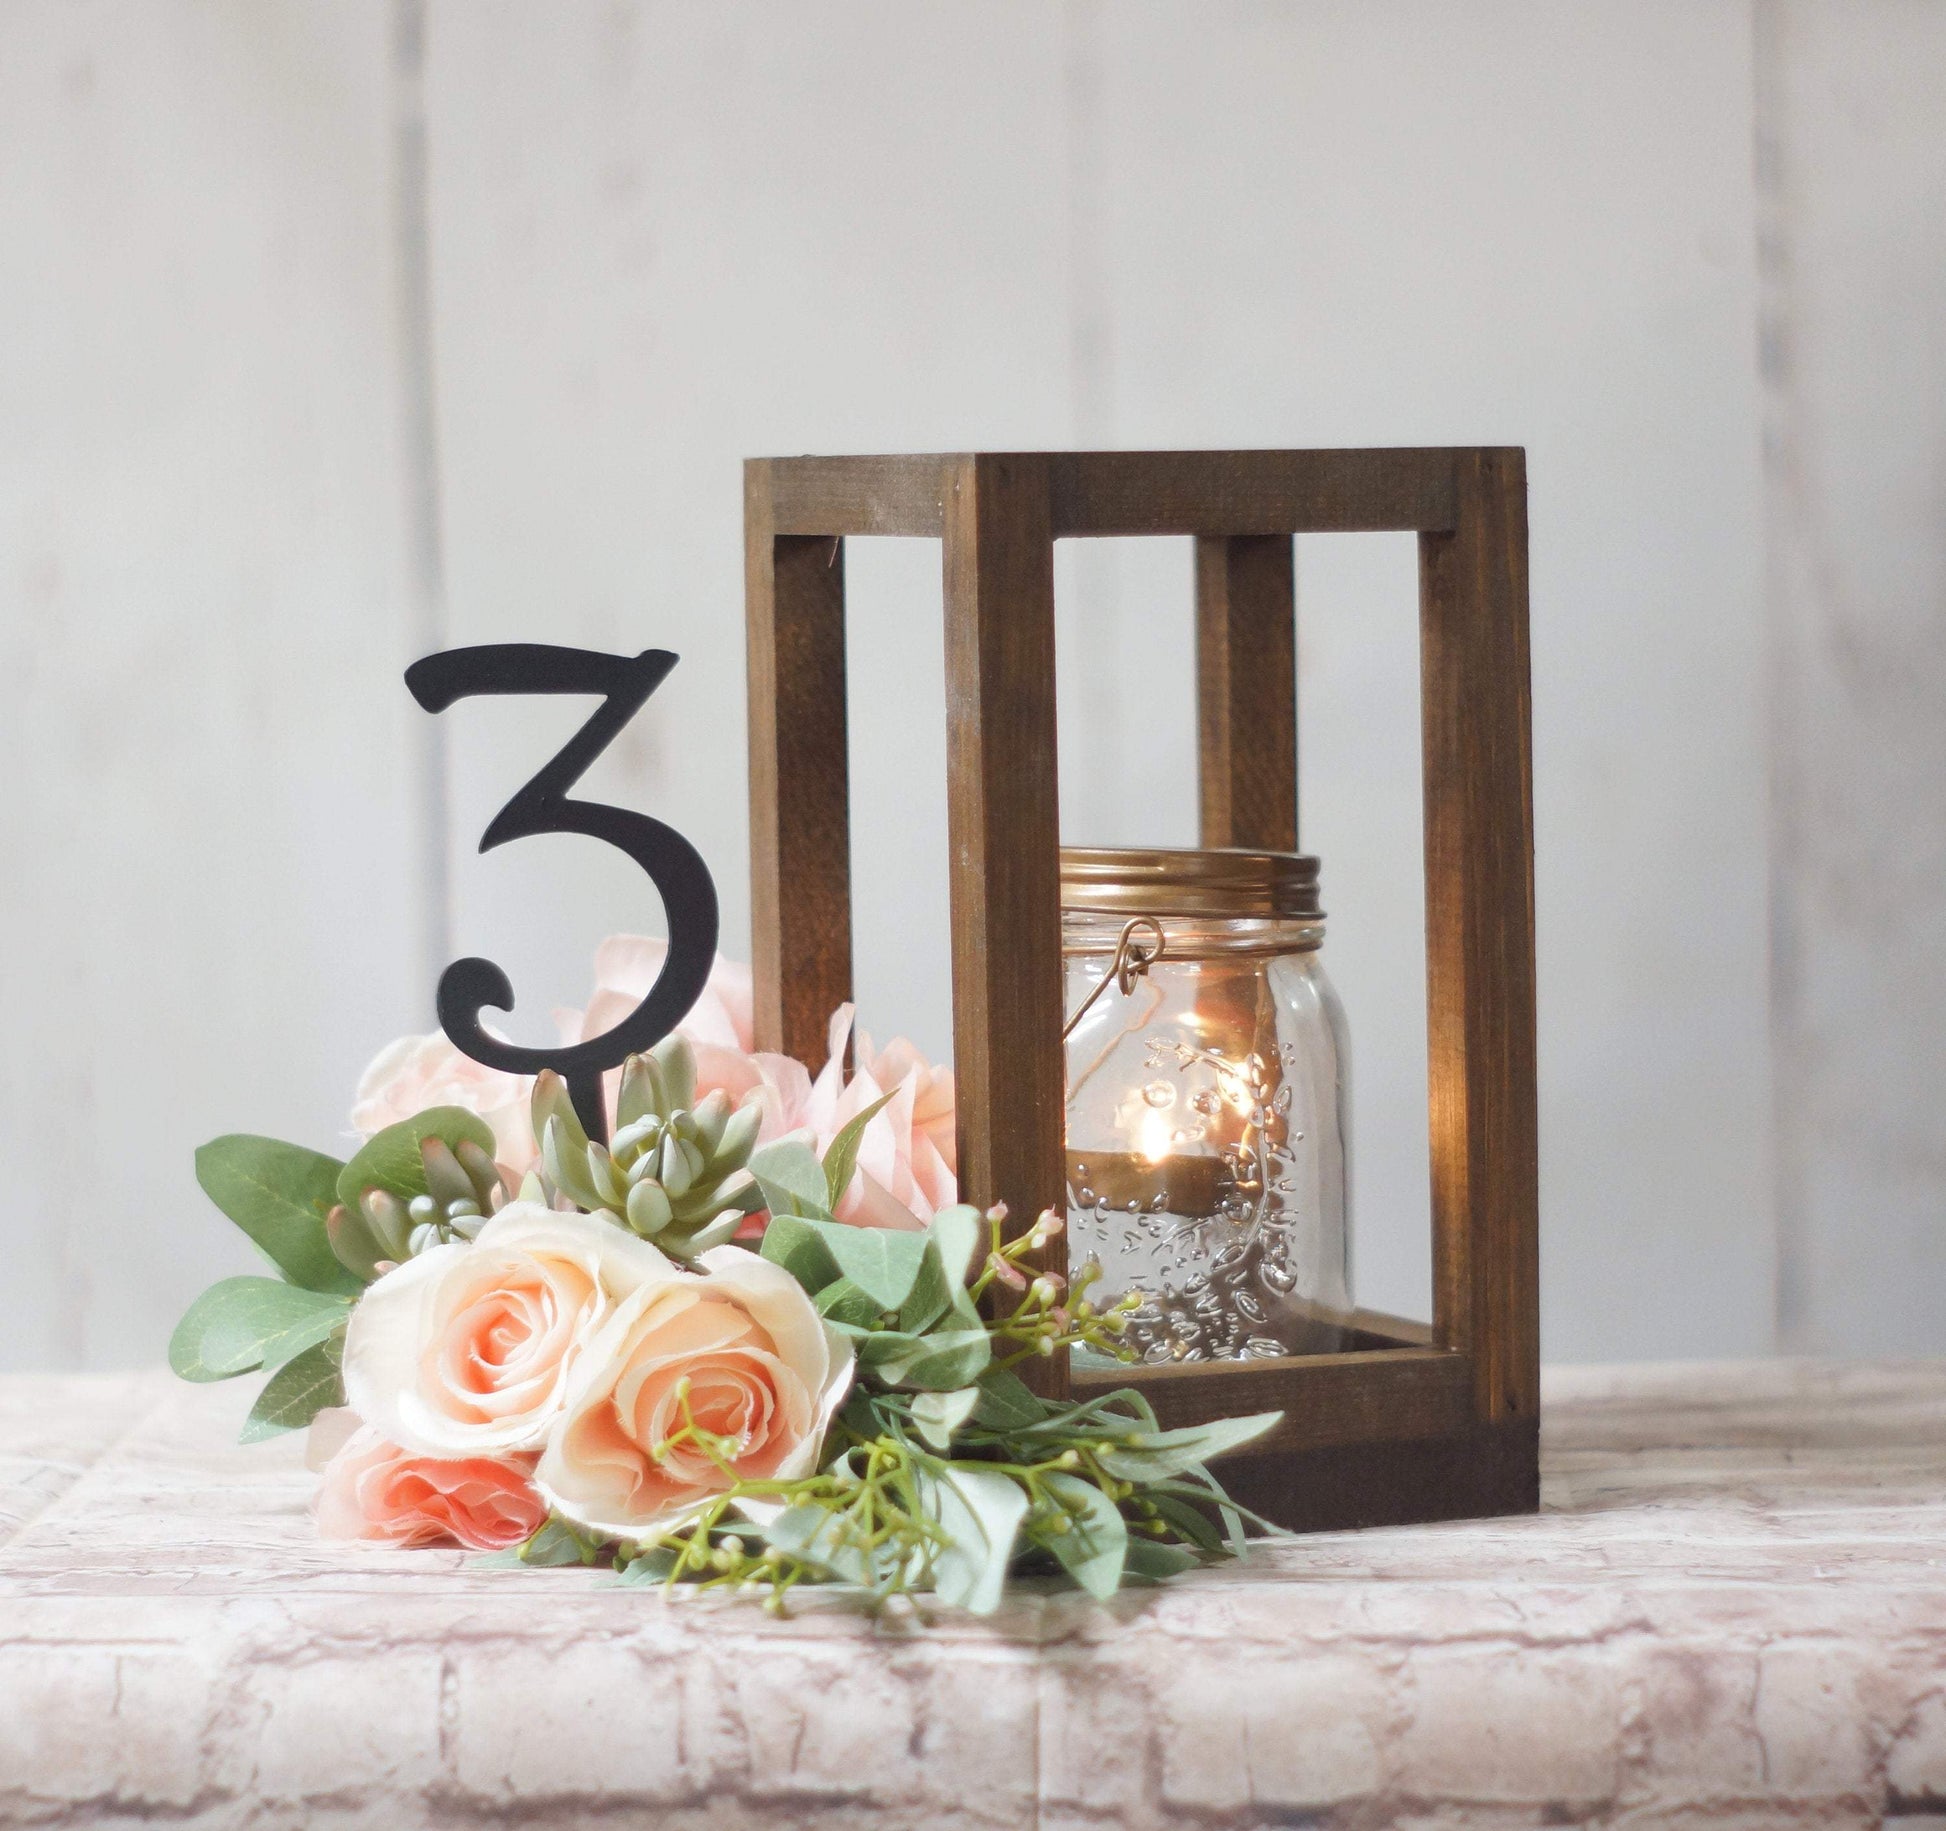 Gold Tall Centerpieces for Wedding Table Decorations – Bridal and